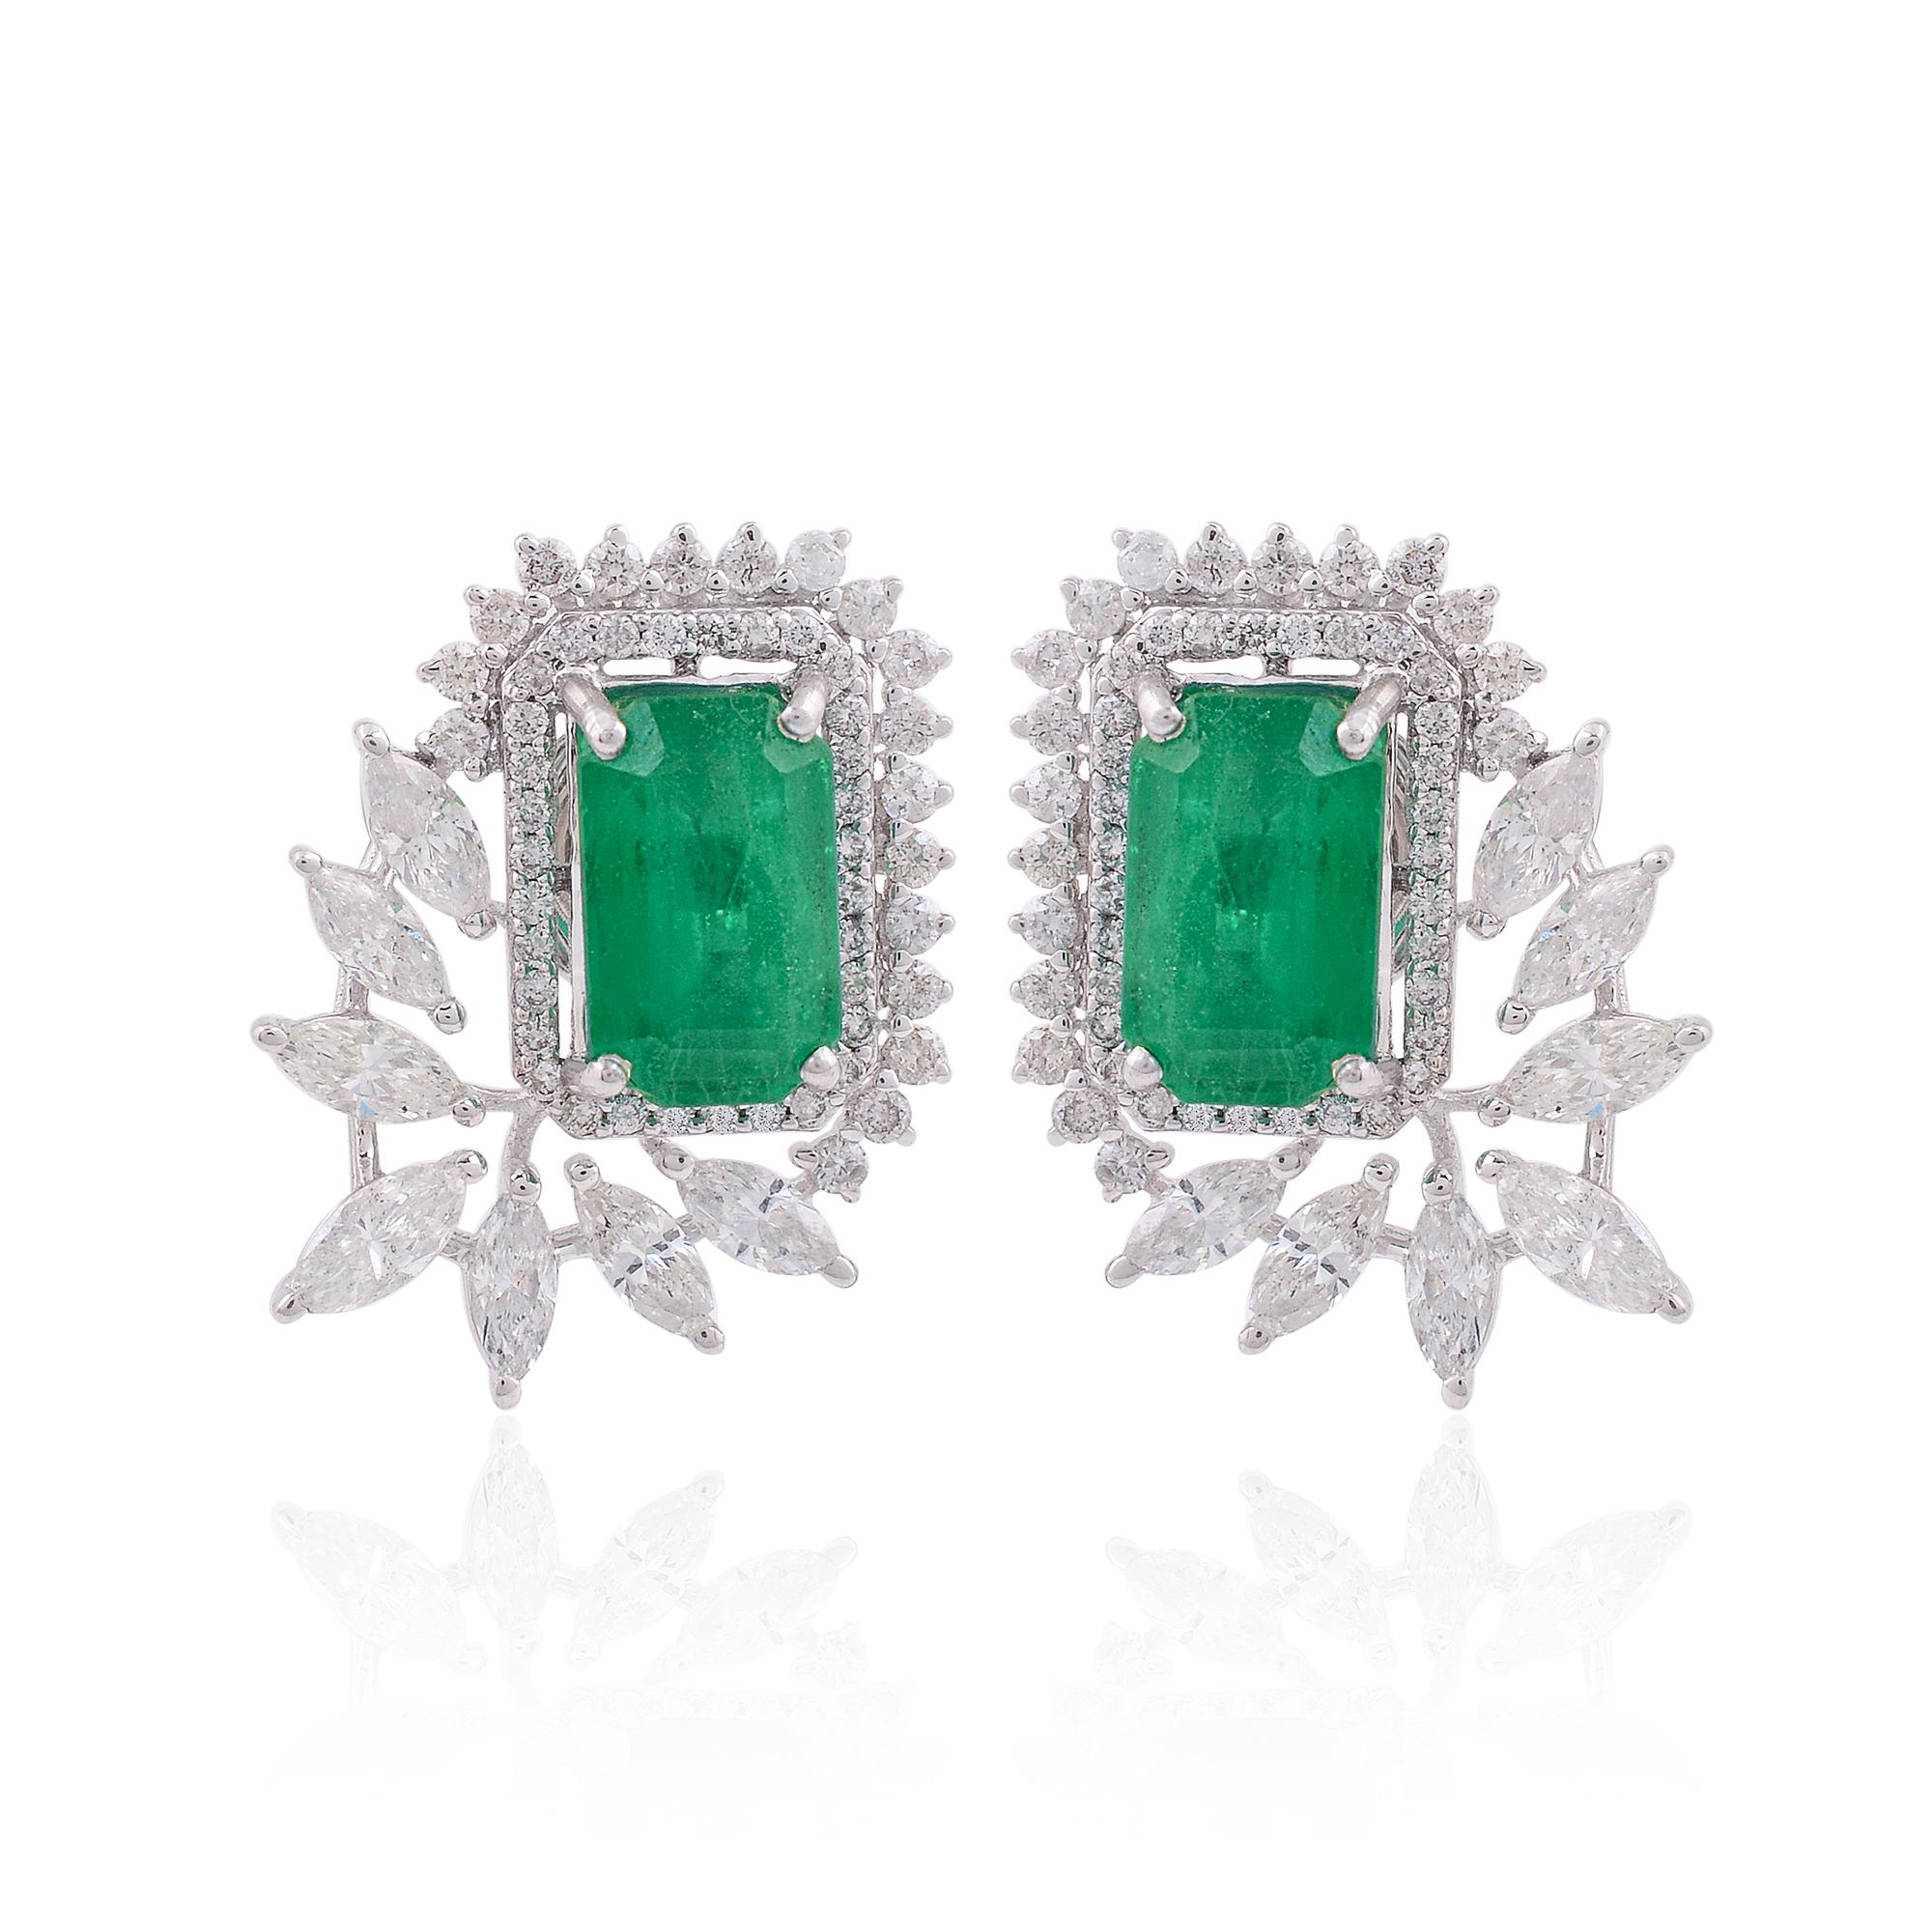 Item Code :- SEE-1093
Gross Wt. :- 6.17 gm
18k White Gold Wt. :- 4.90 gm
Natural Diamond Wt. :- 2.20 Ct. ( AVERAGE DIAMOND CLARITY SI1-SI2 & COLOR H-I )
Emerald Wt. :- 4.14 Ct.
Earrings Size :- 20.70 x 16.33 mm approx.

✦